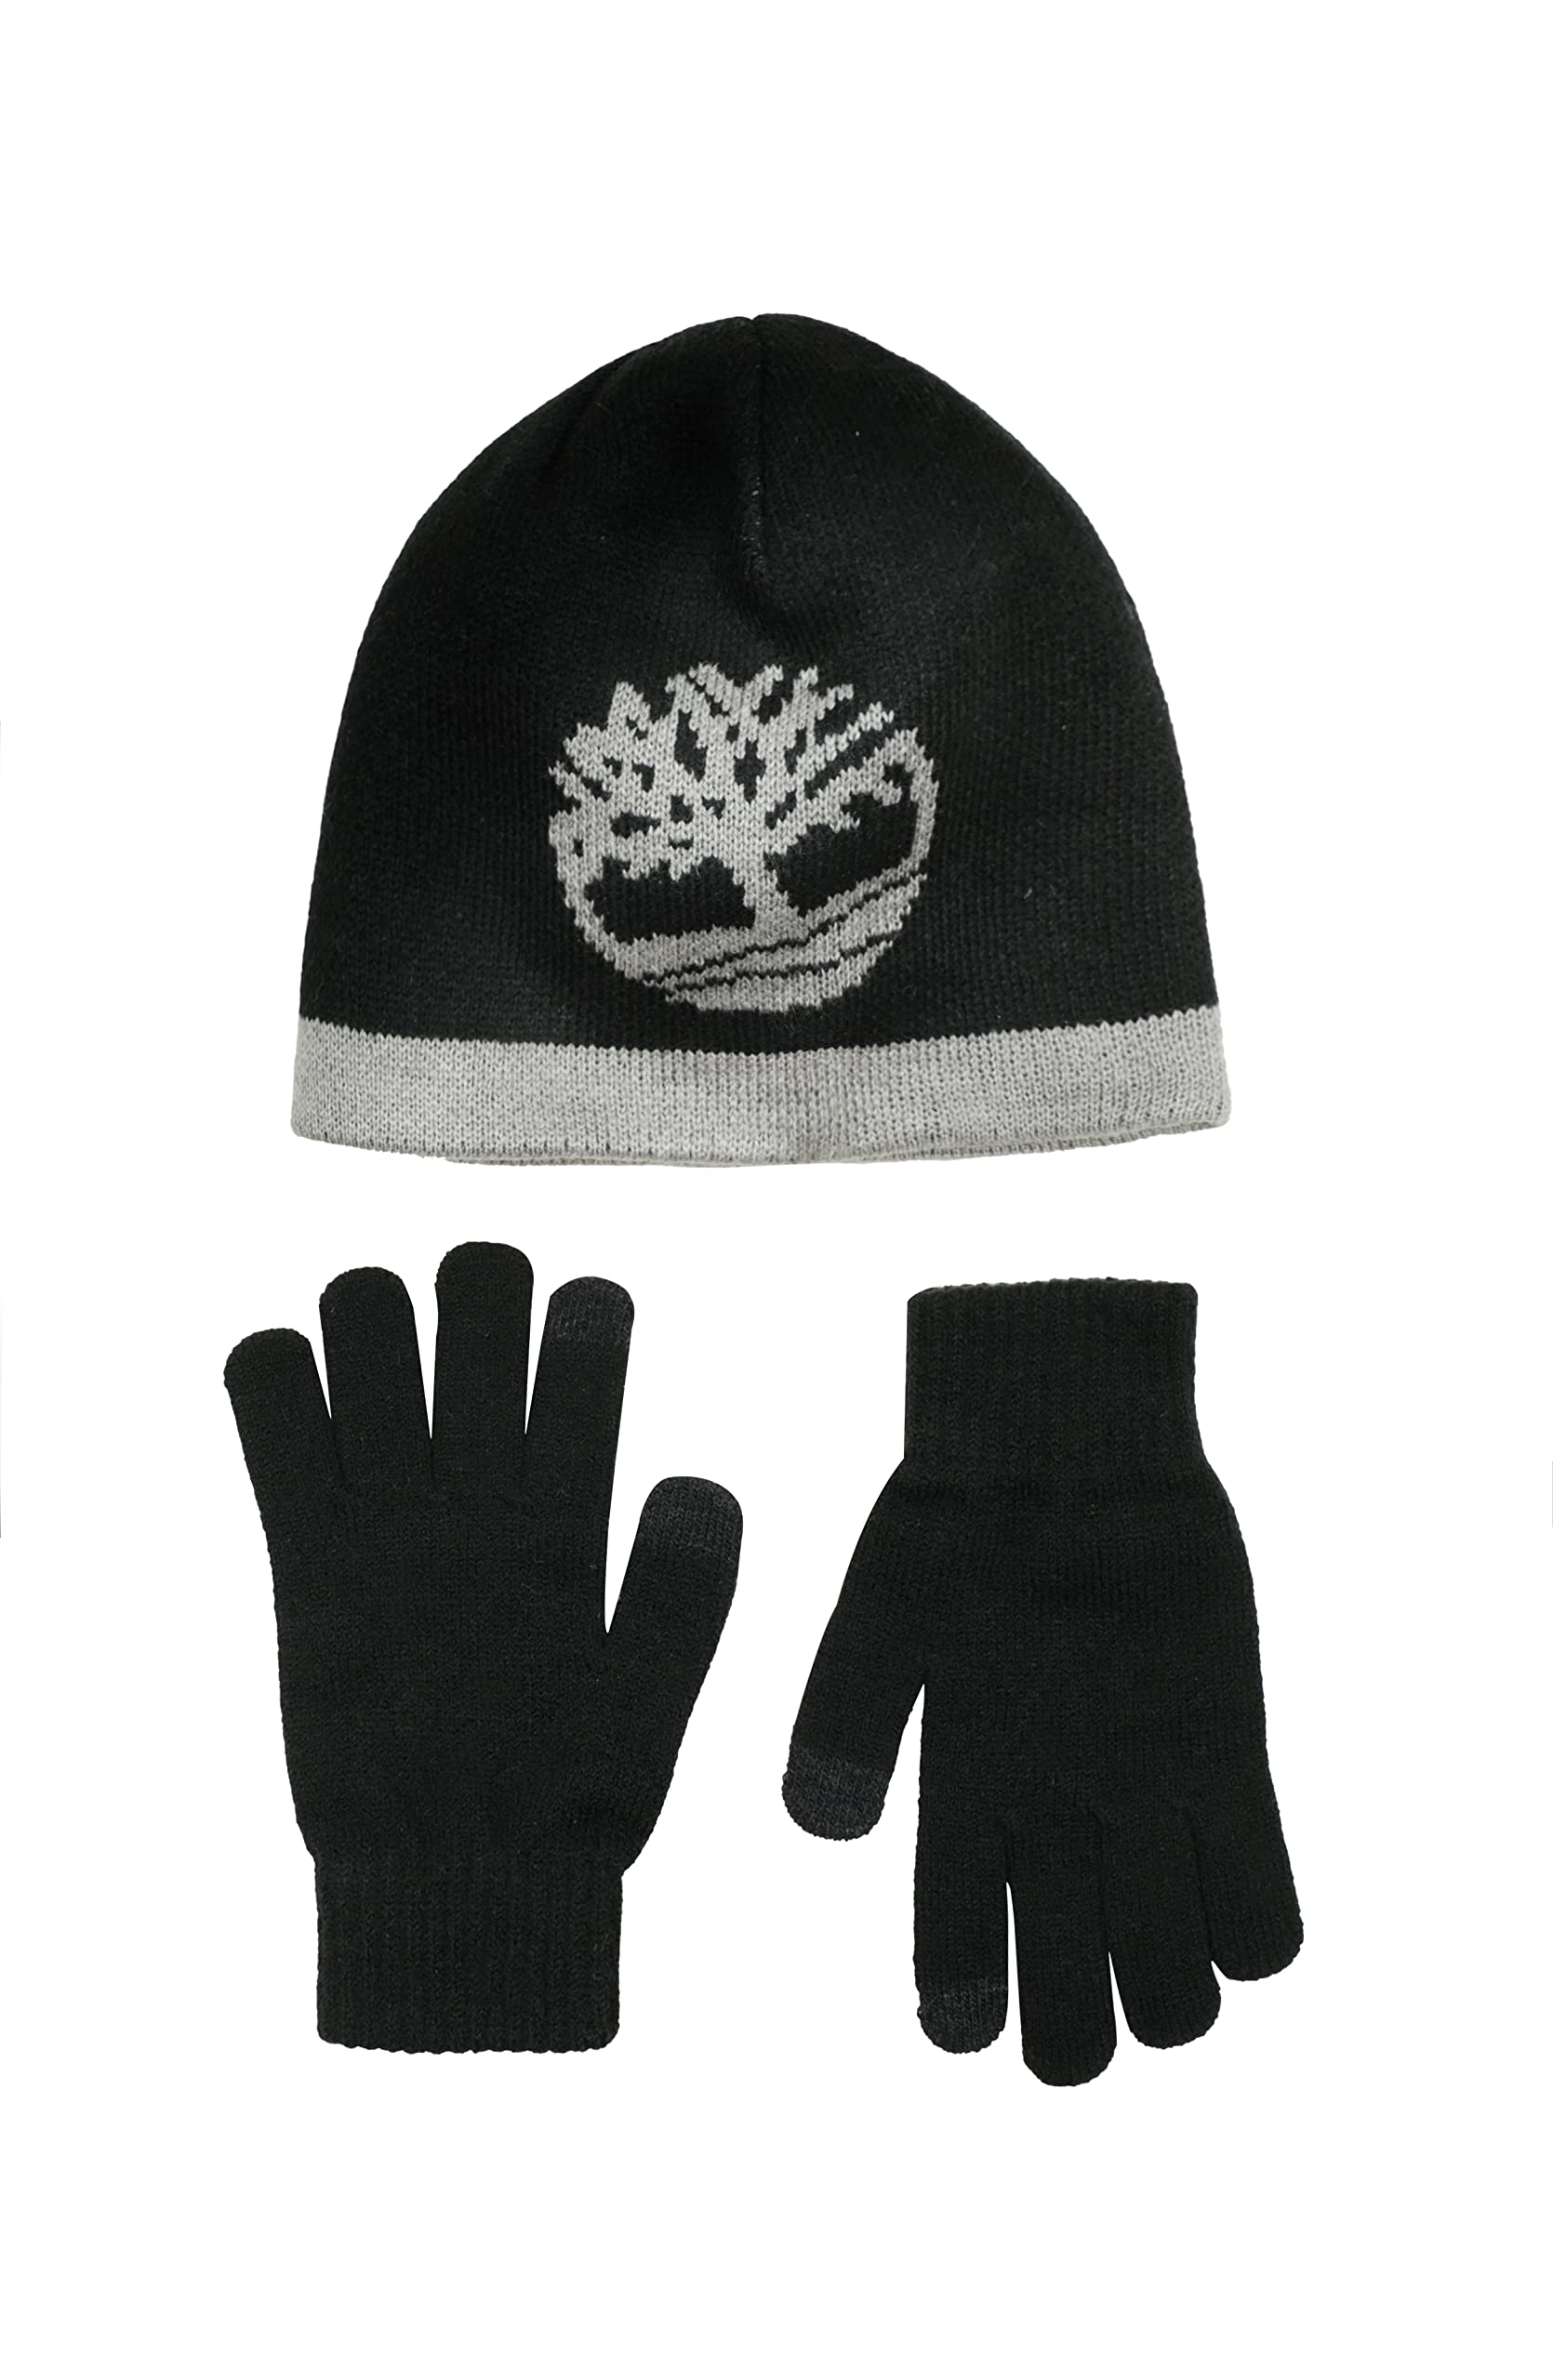 2-Pc Timberland Boys' Reversible Beanie Cuff Hat w/ Contrast Magic Glove Set (Black, Sizes: 5-8) $7.03, Sizes:8-16 $7.33 + Free Shipping w/ Prime or on $25+